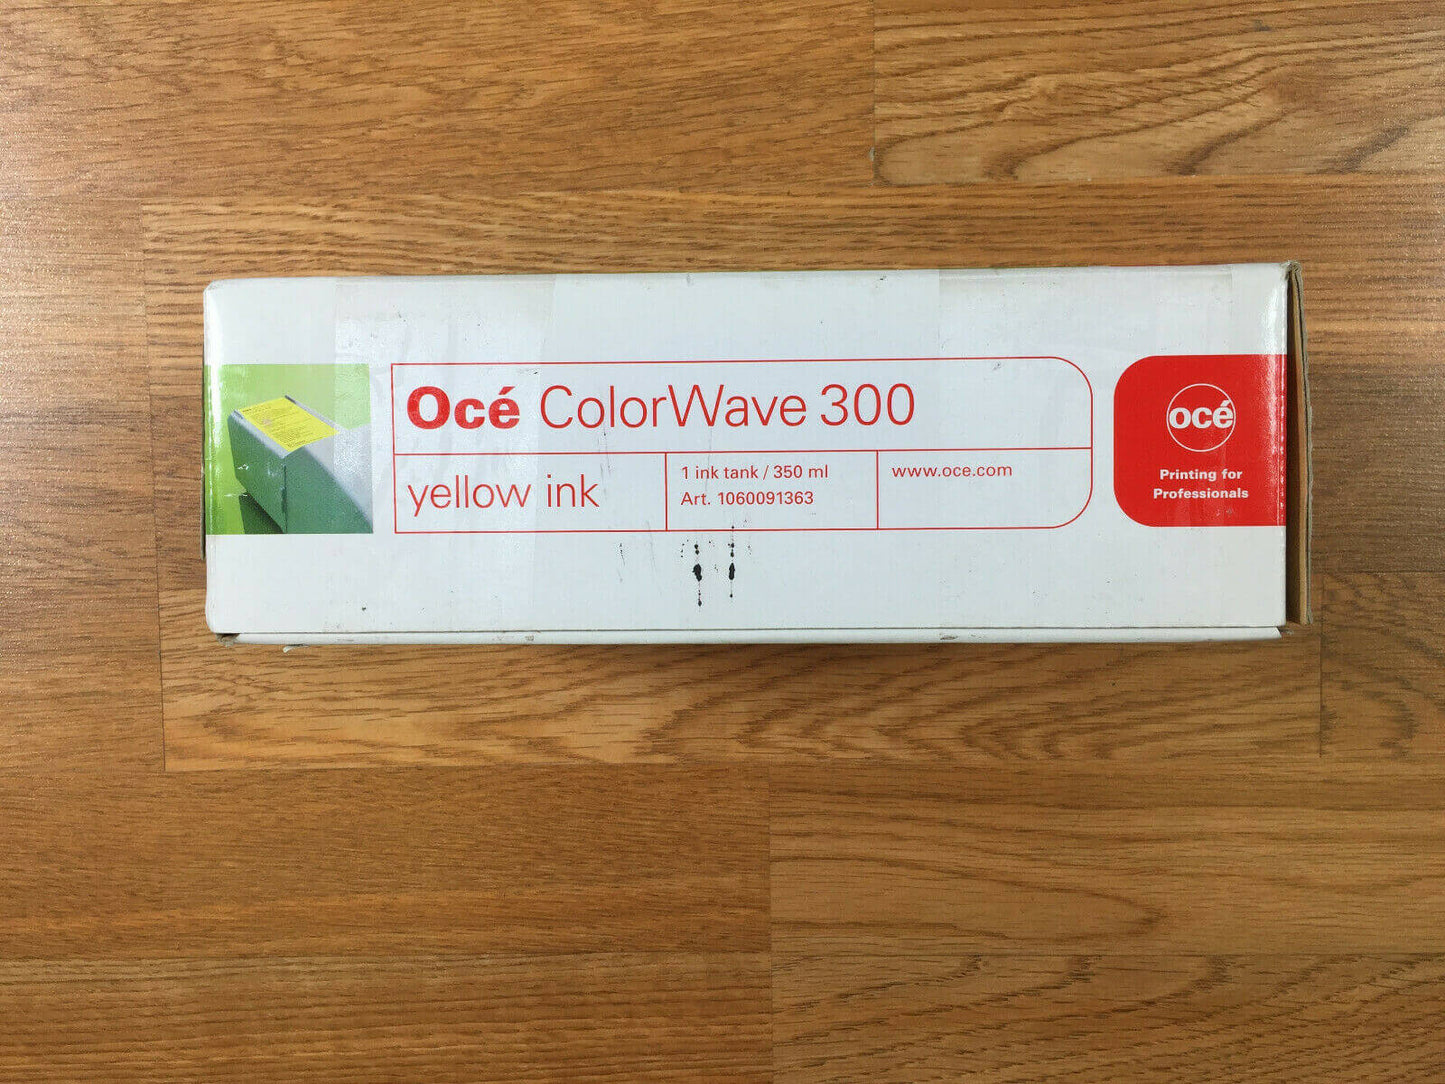 New Open Box Oce ColorWave 300 Yellow Ink Tank 350ml Art.1060091363 - copier-clearance-center